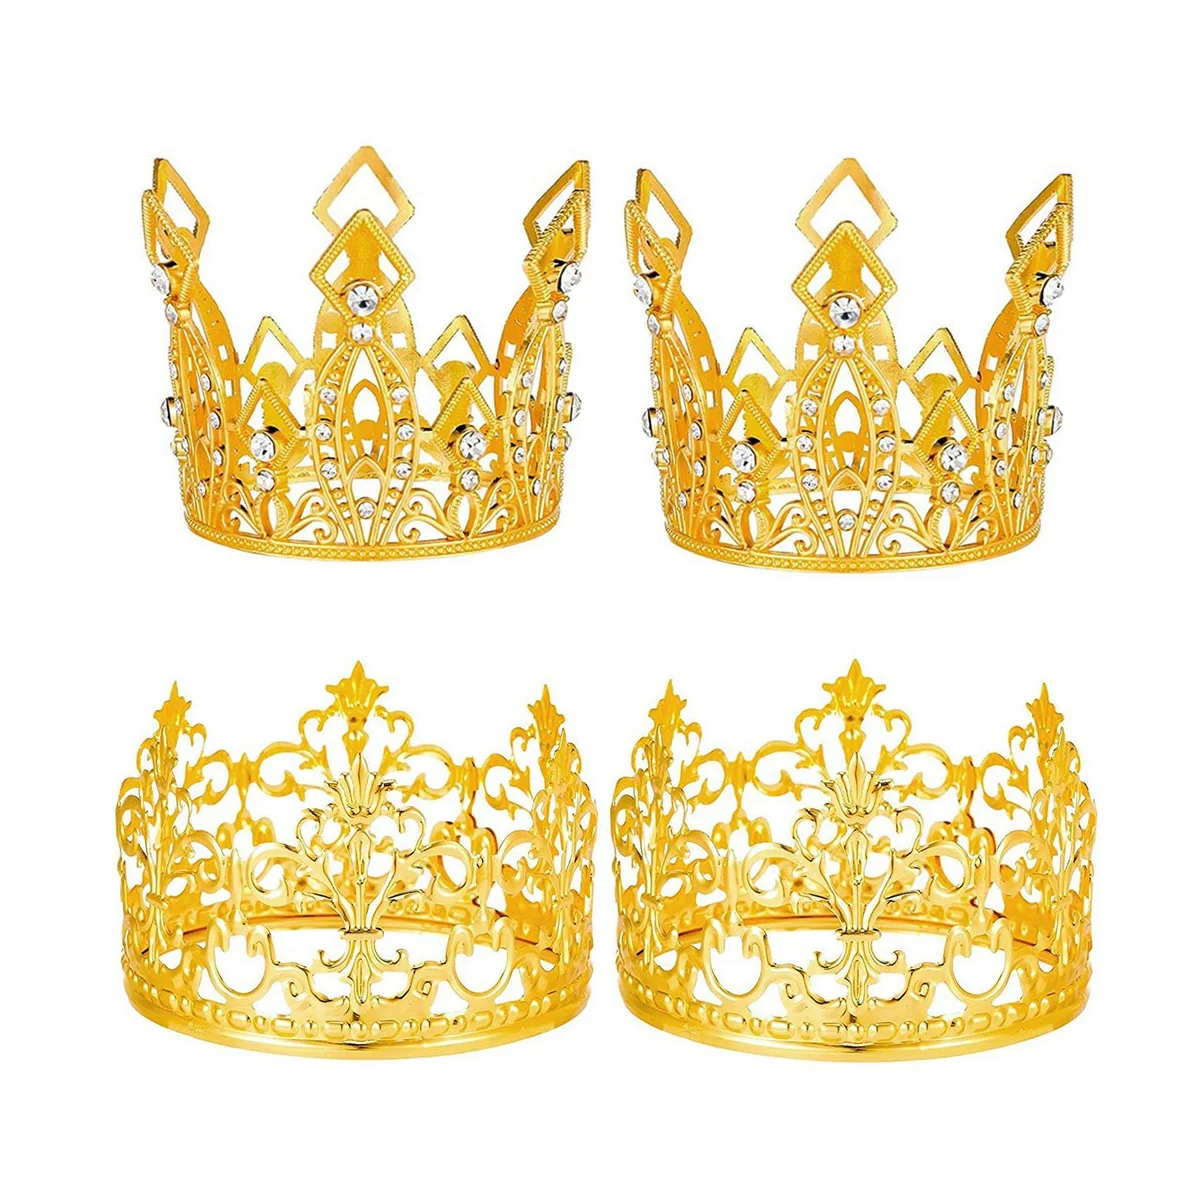 

4 Pcs Gold Crown Cake Topper Crown Tiara Cake Topper for Wedding Birthday Baby Shower Party Cake Decoration 2 Styles